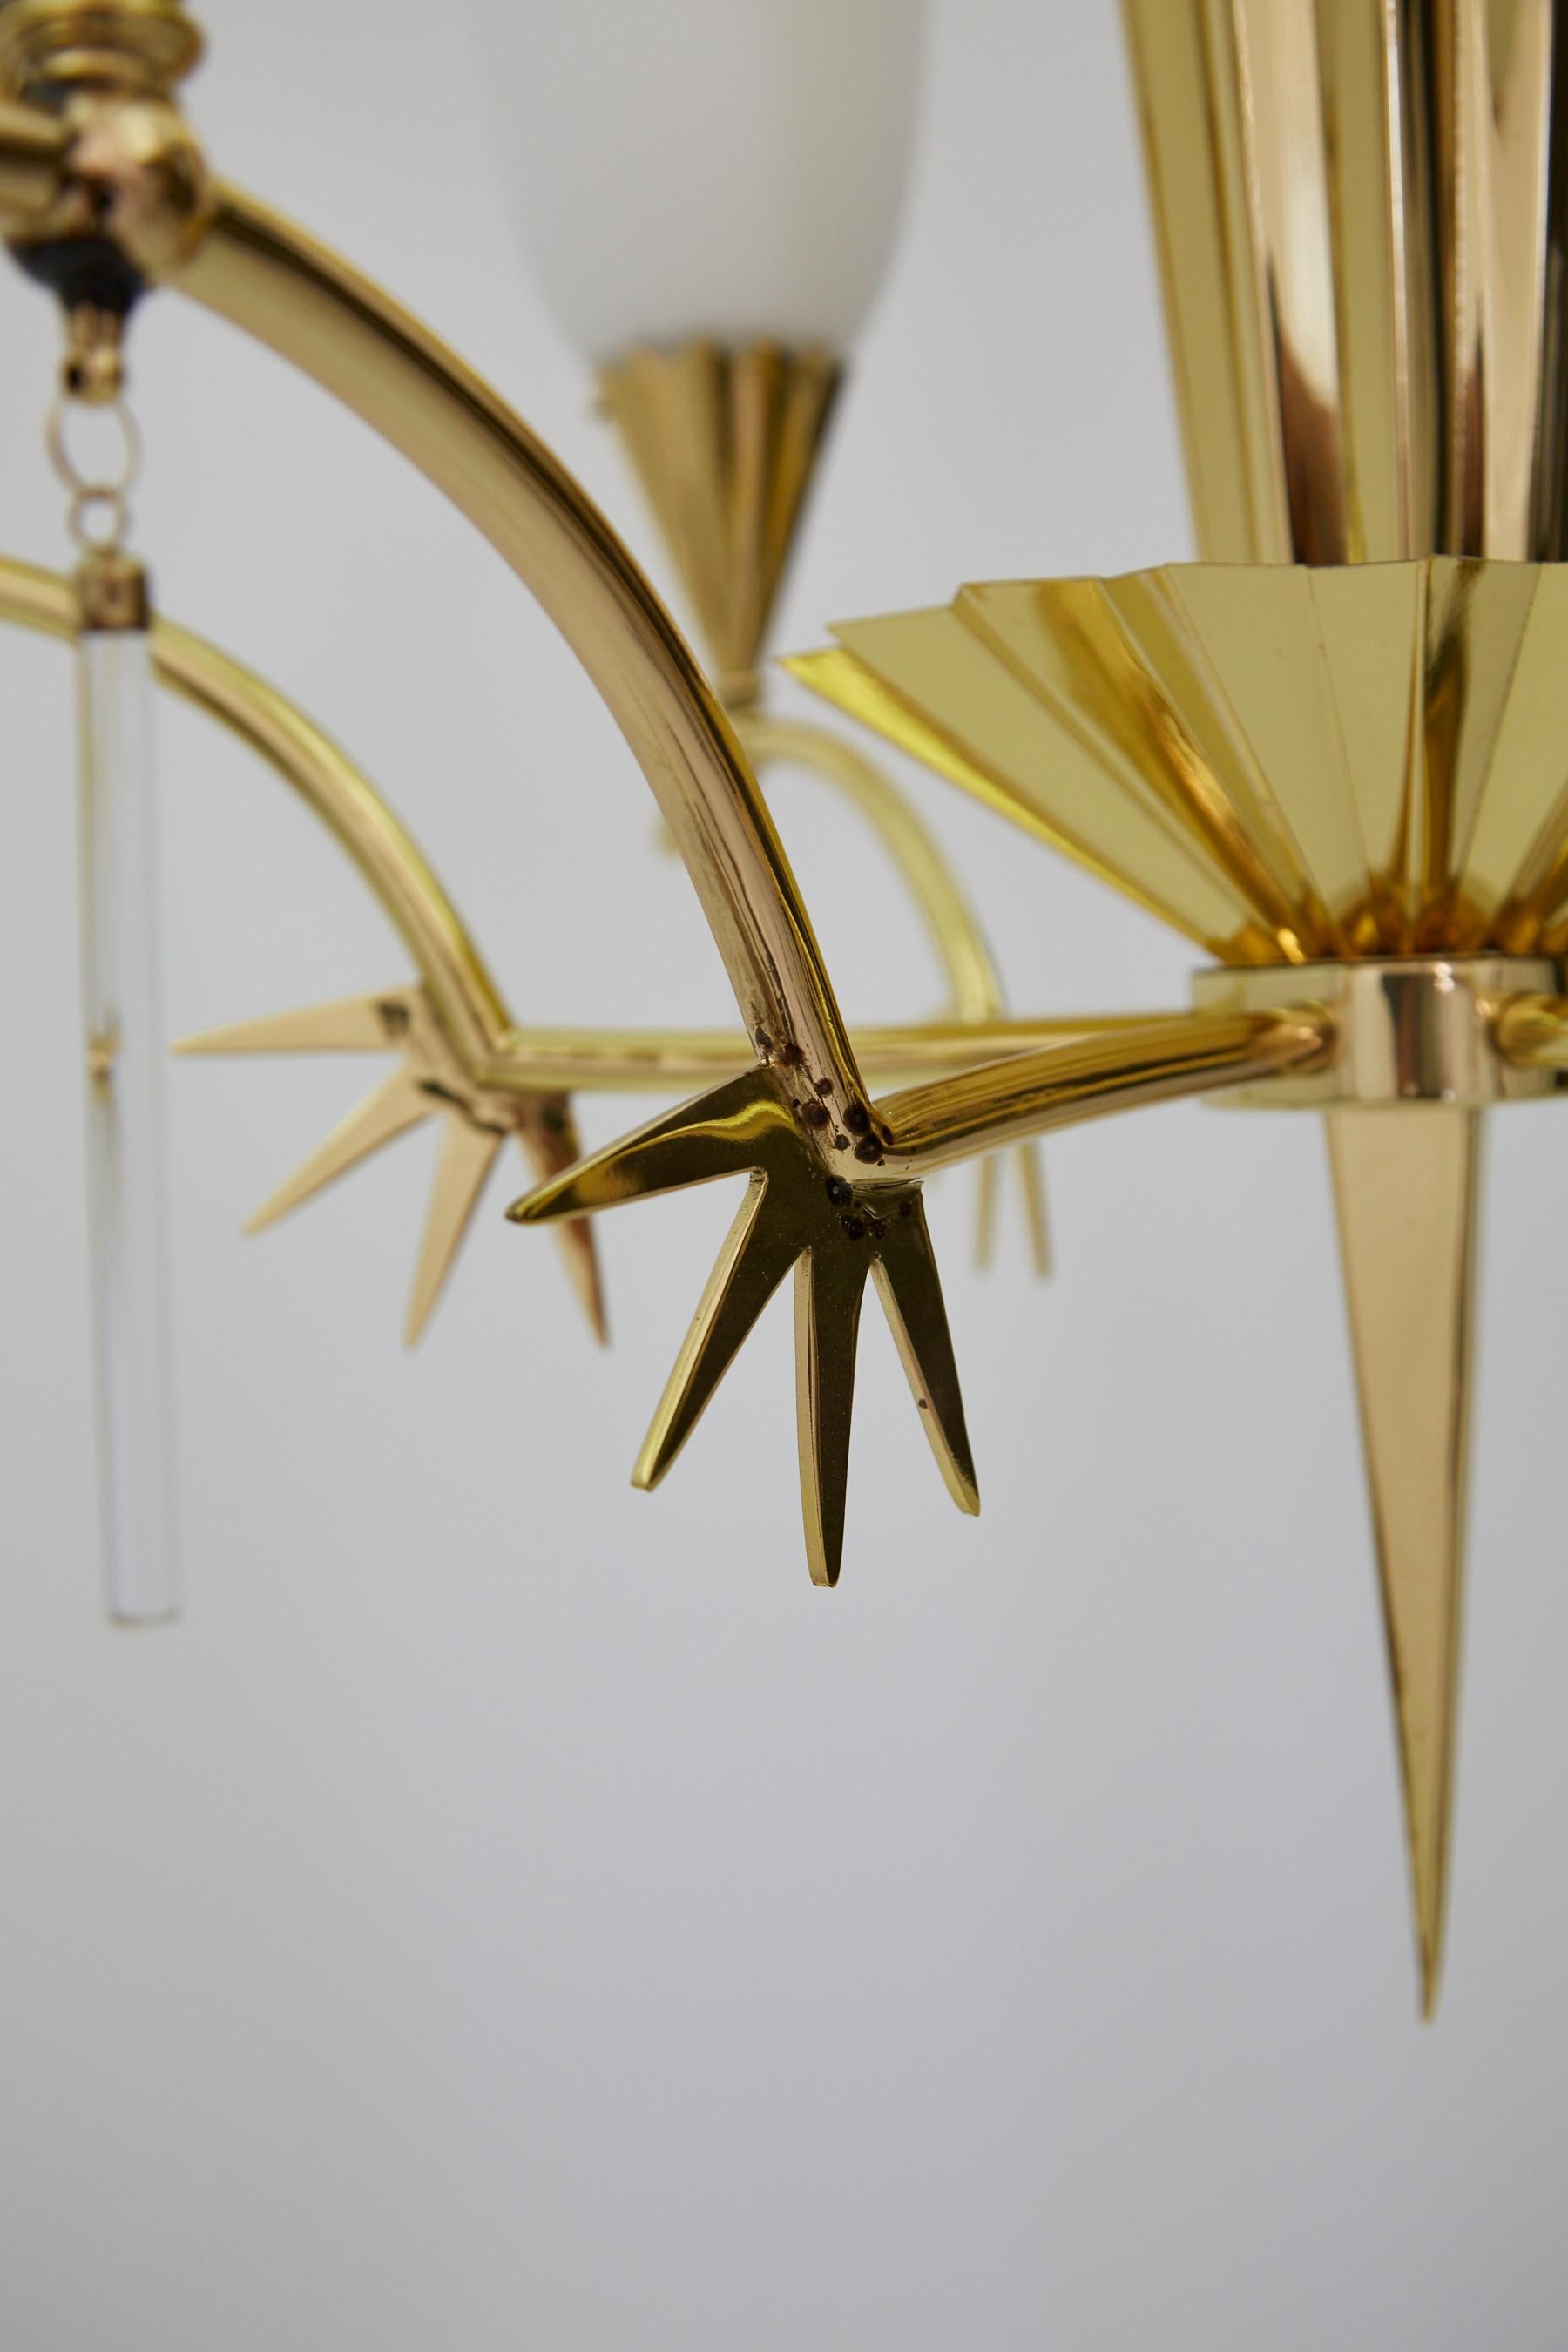 Frosted Six-Arm Italian Brass Chandelier with Decorative Spikes, 1940s For Sale